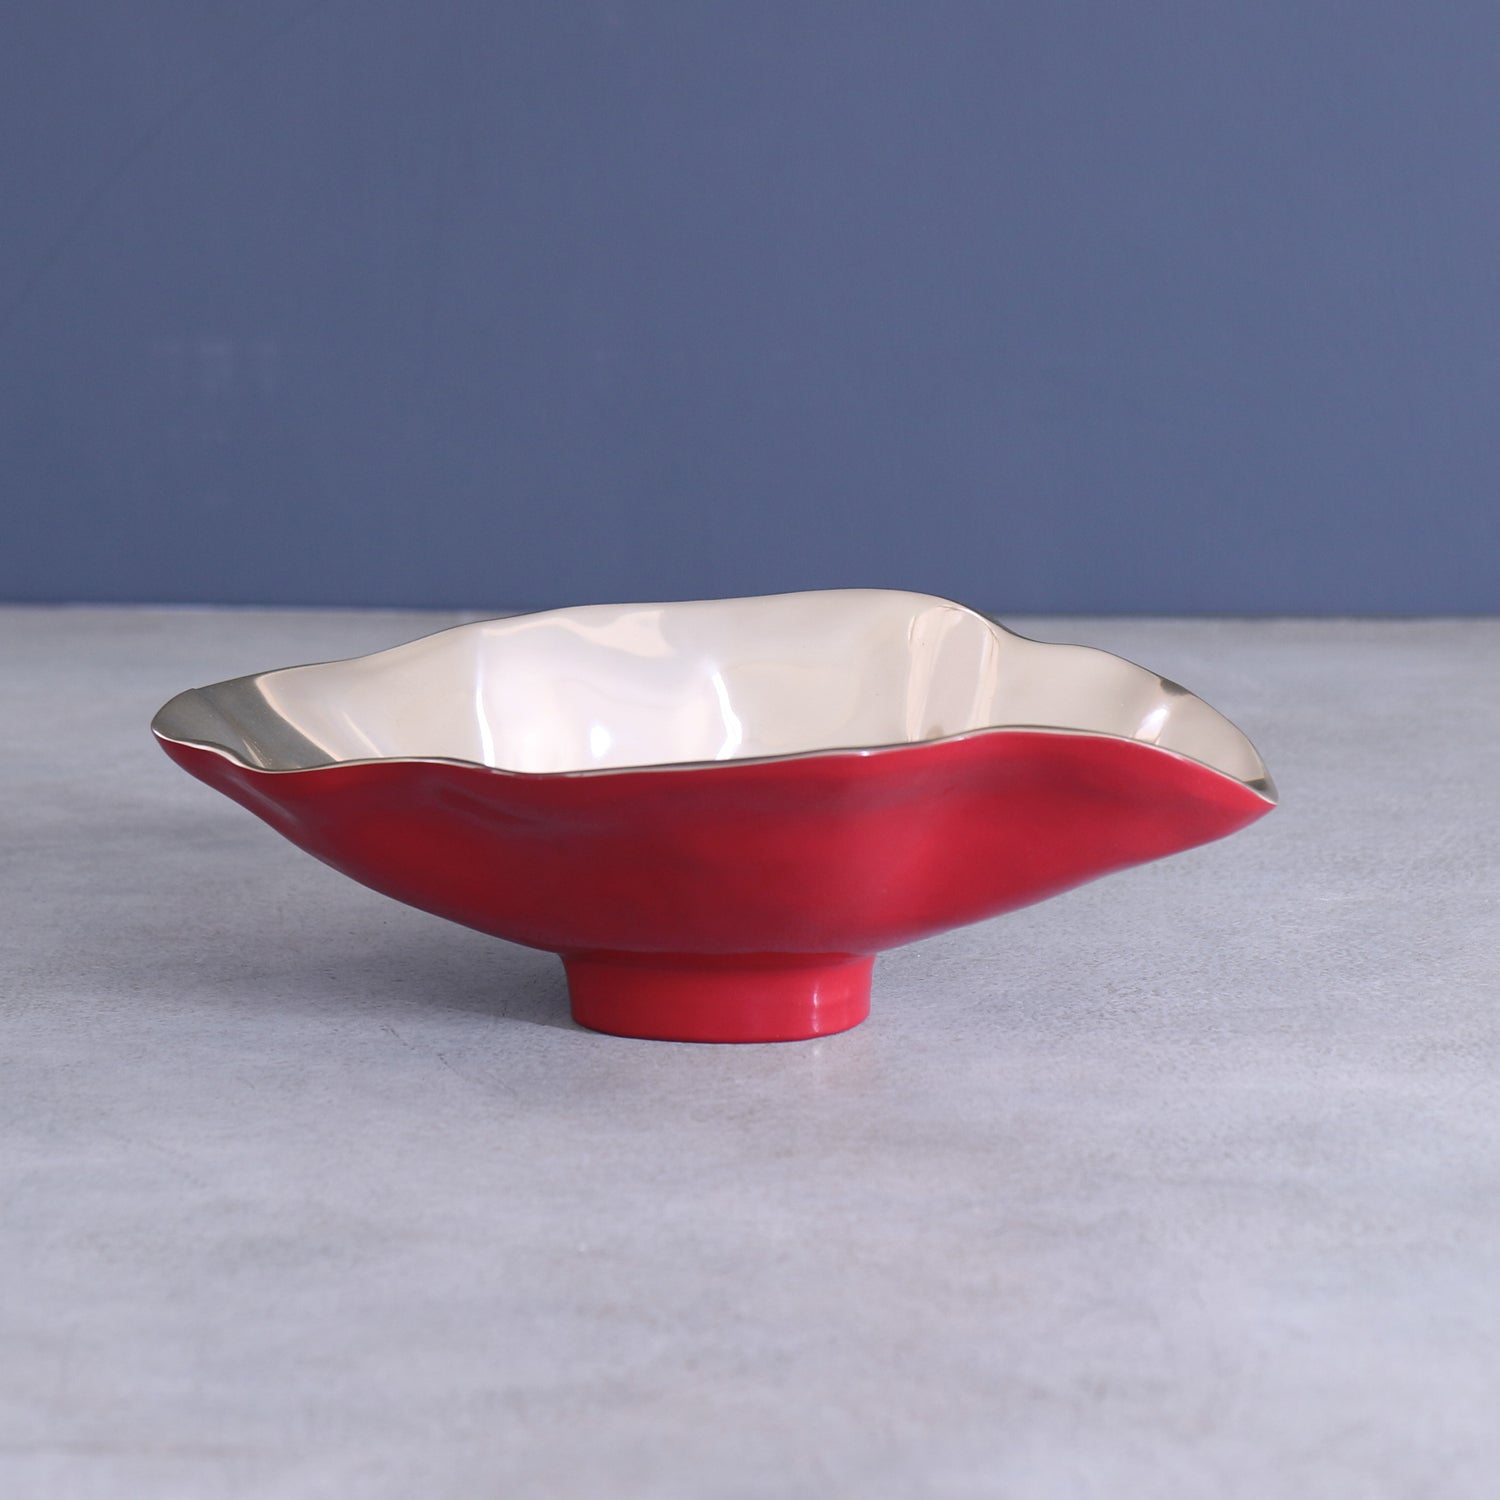 THANNI Maia Small Oval Bowl with Spoon (Red and Gold)